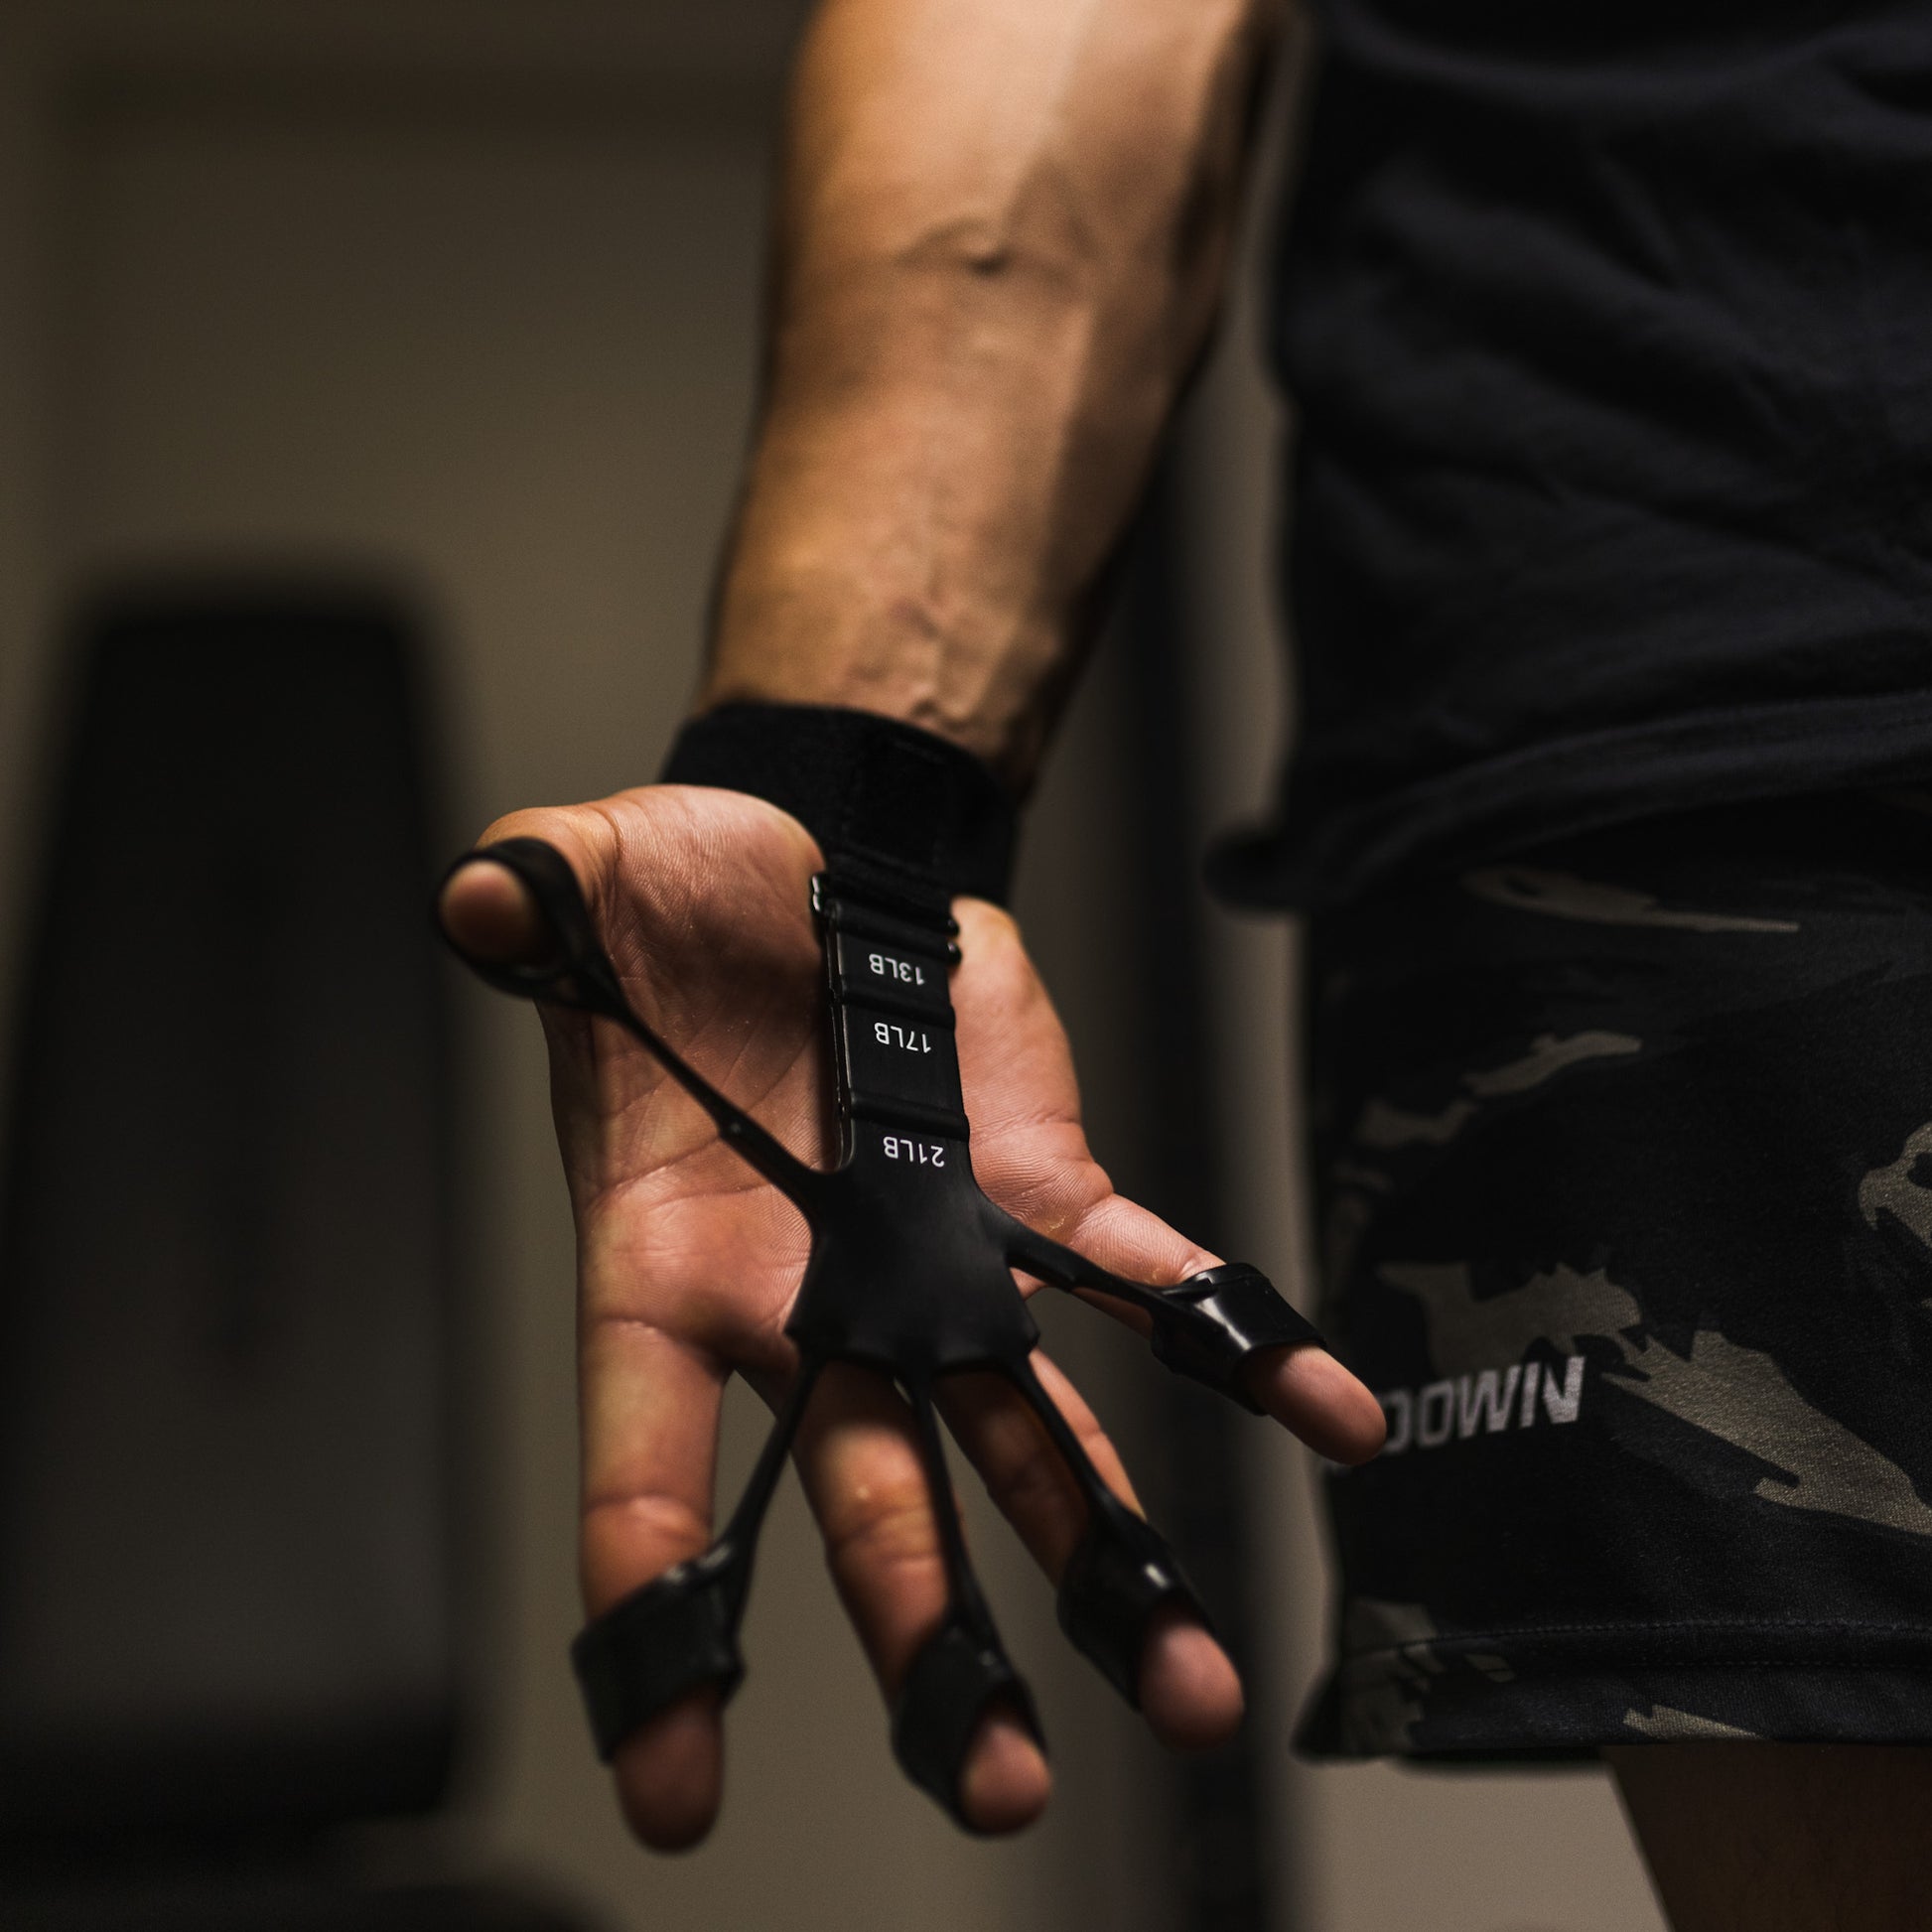 The Gripster is Your Ultimate Source for Taking Grip to The Next Level